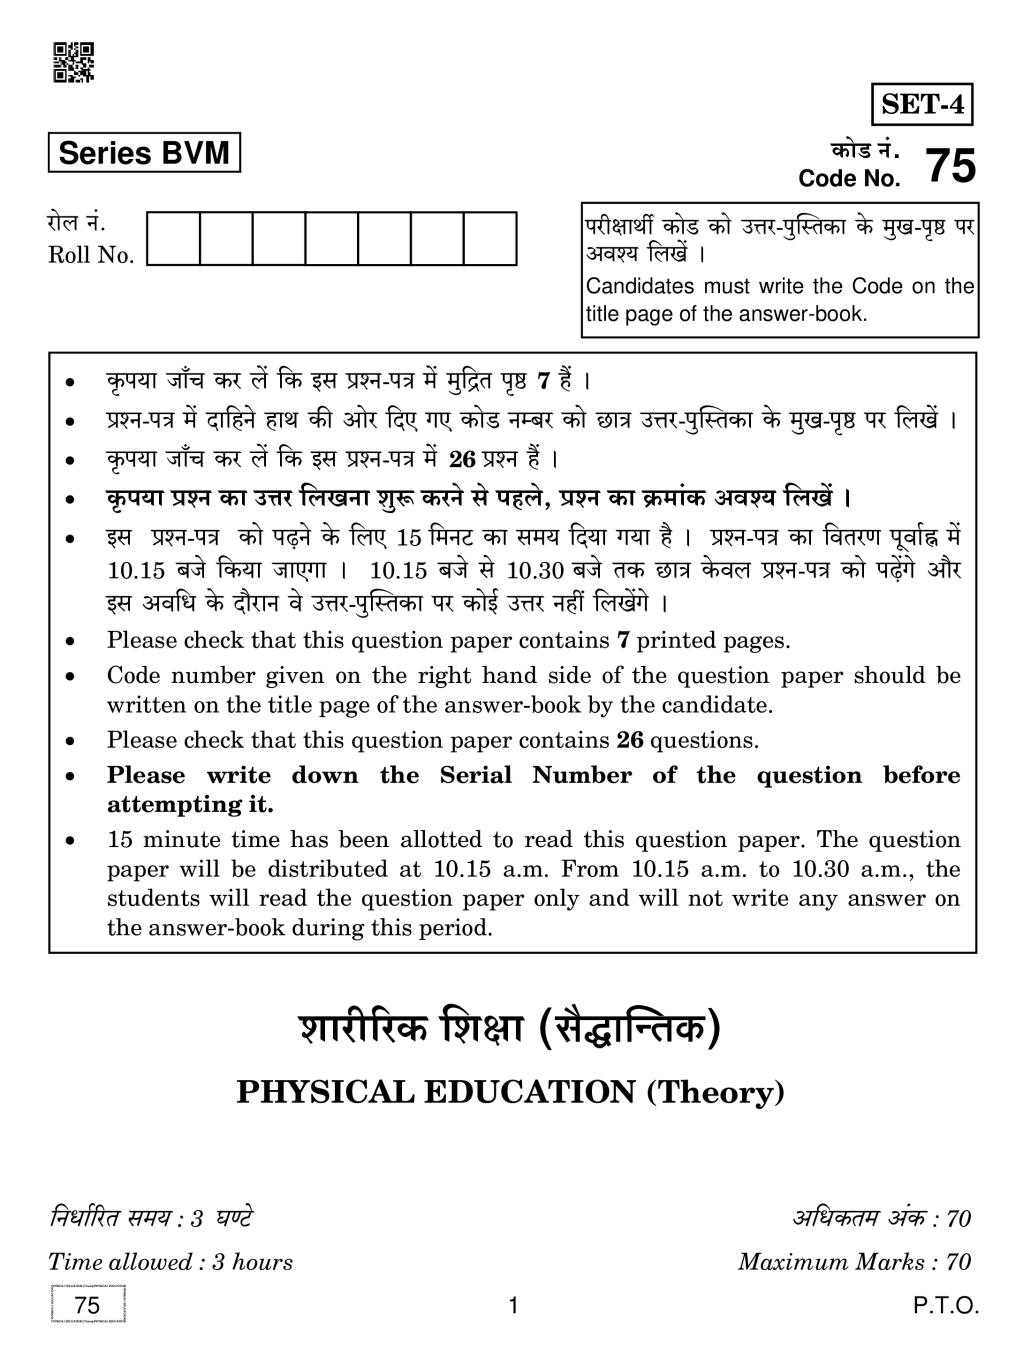 cbse-class-12-physical-education-question-paper-2019